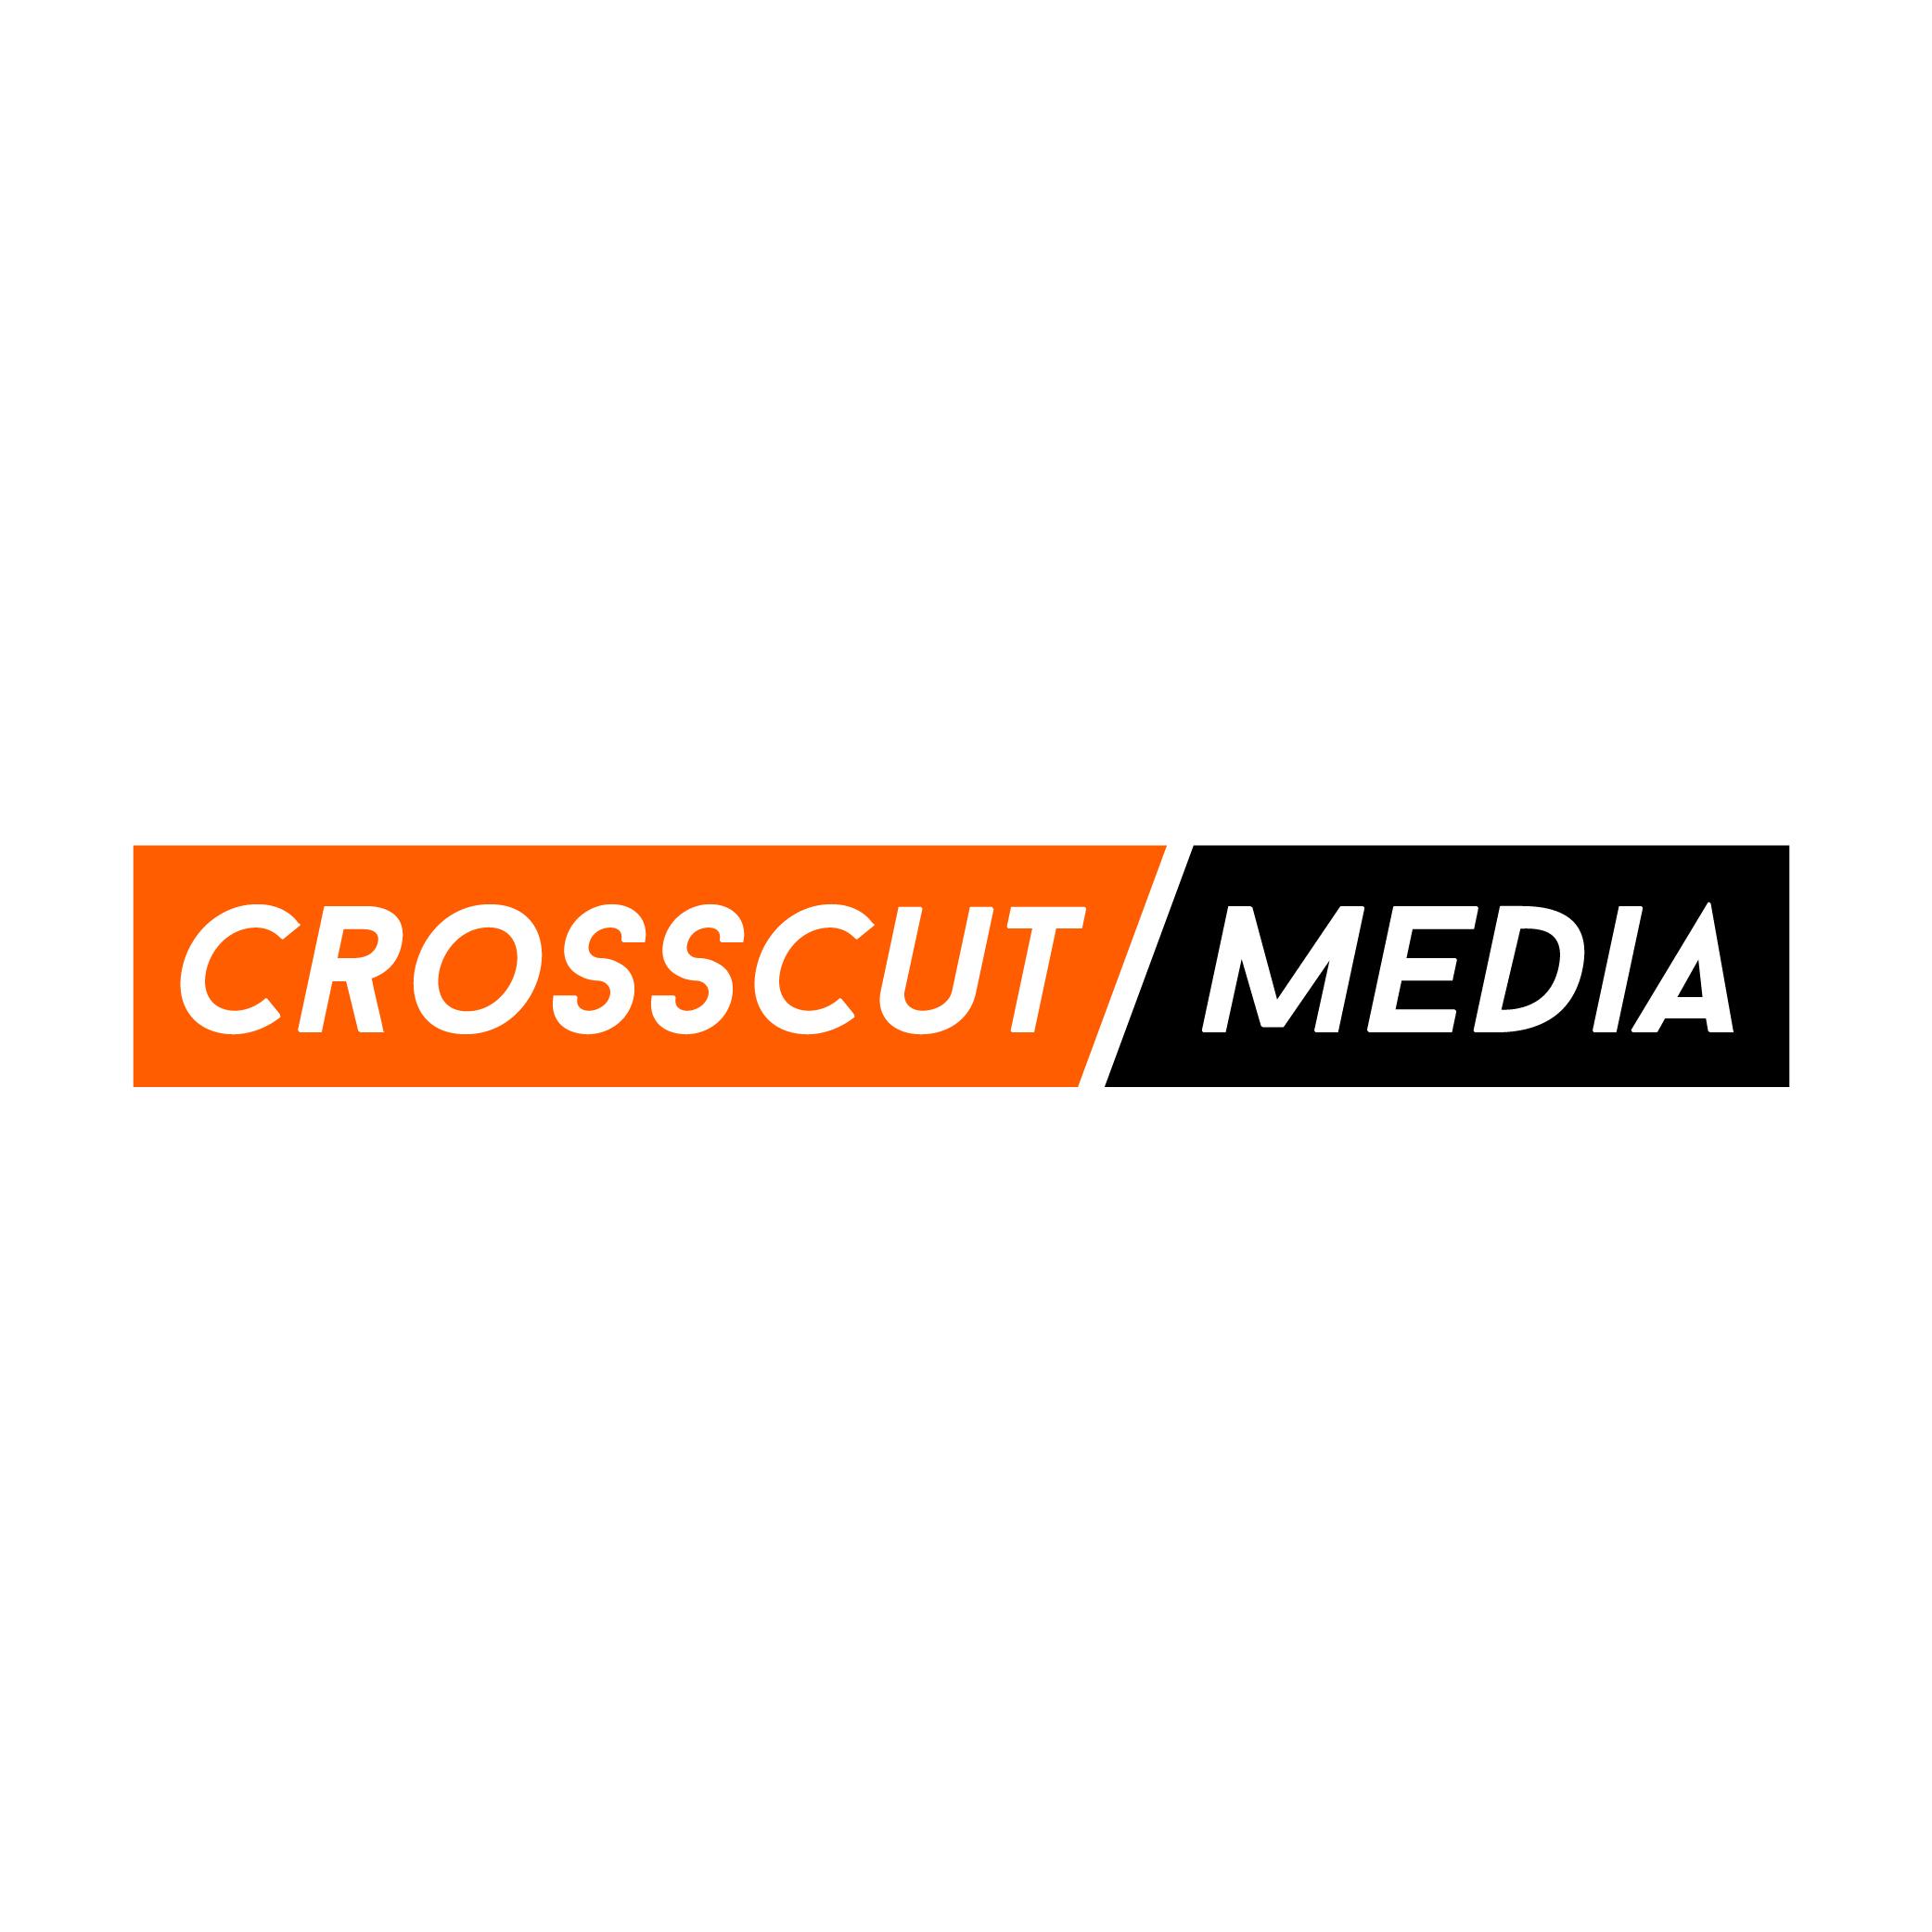 Crosscut Media profile on Qualified.One